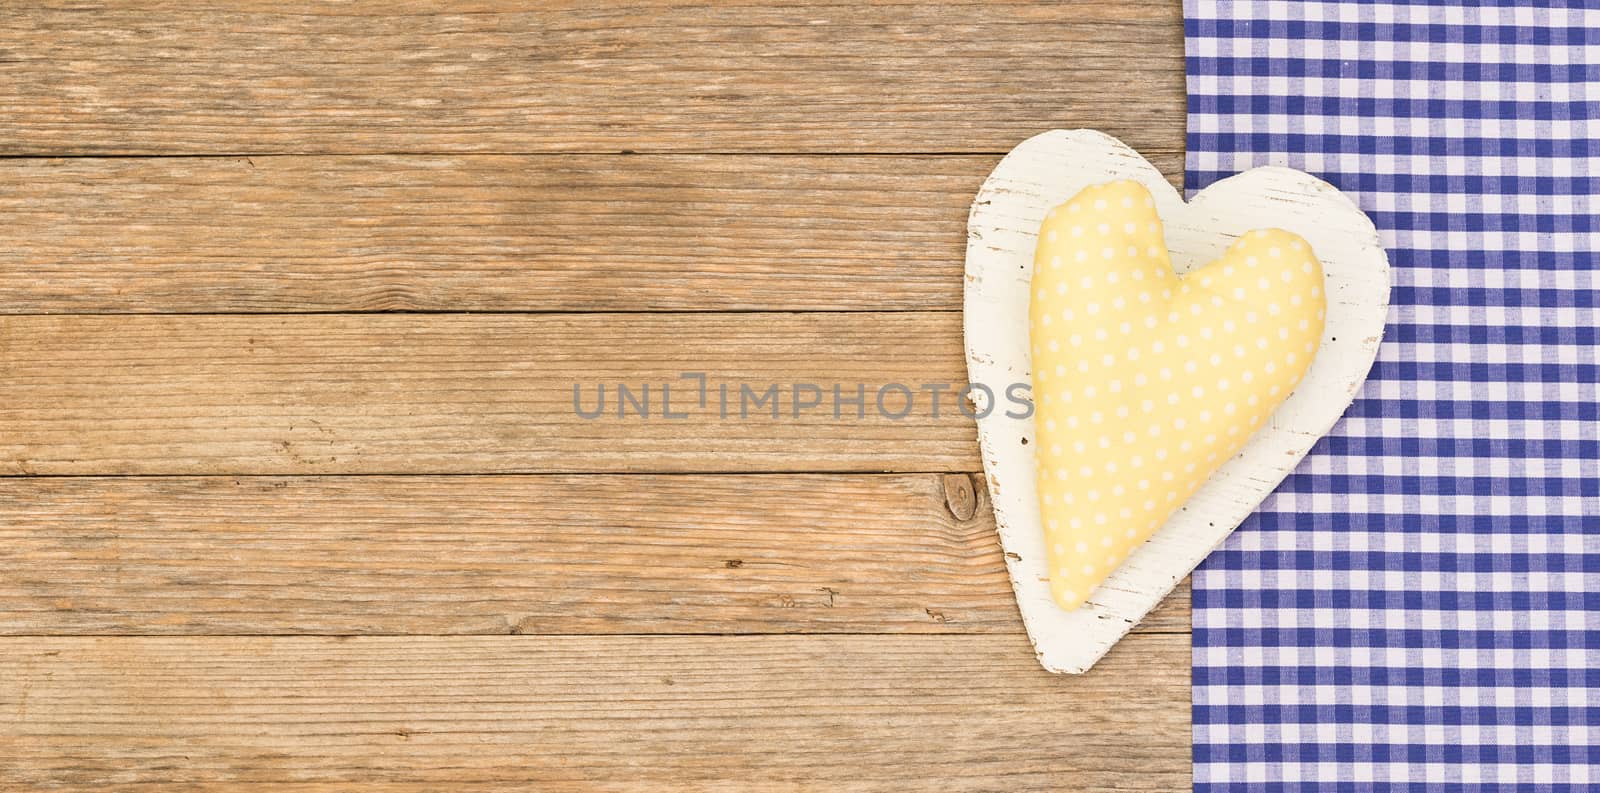 Yellow heart on blue fabric border and wooden background by Vulcano